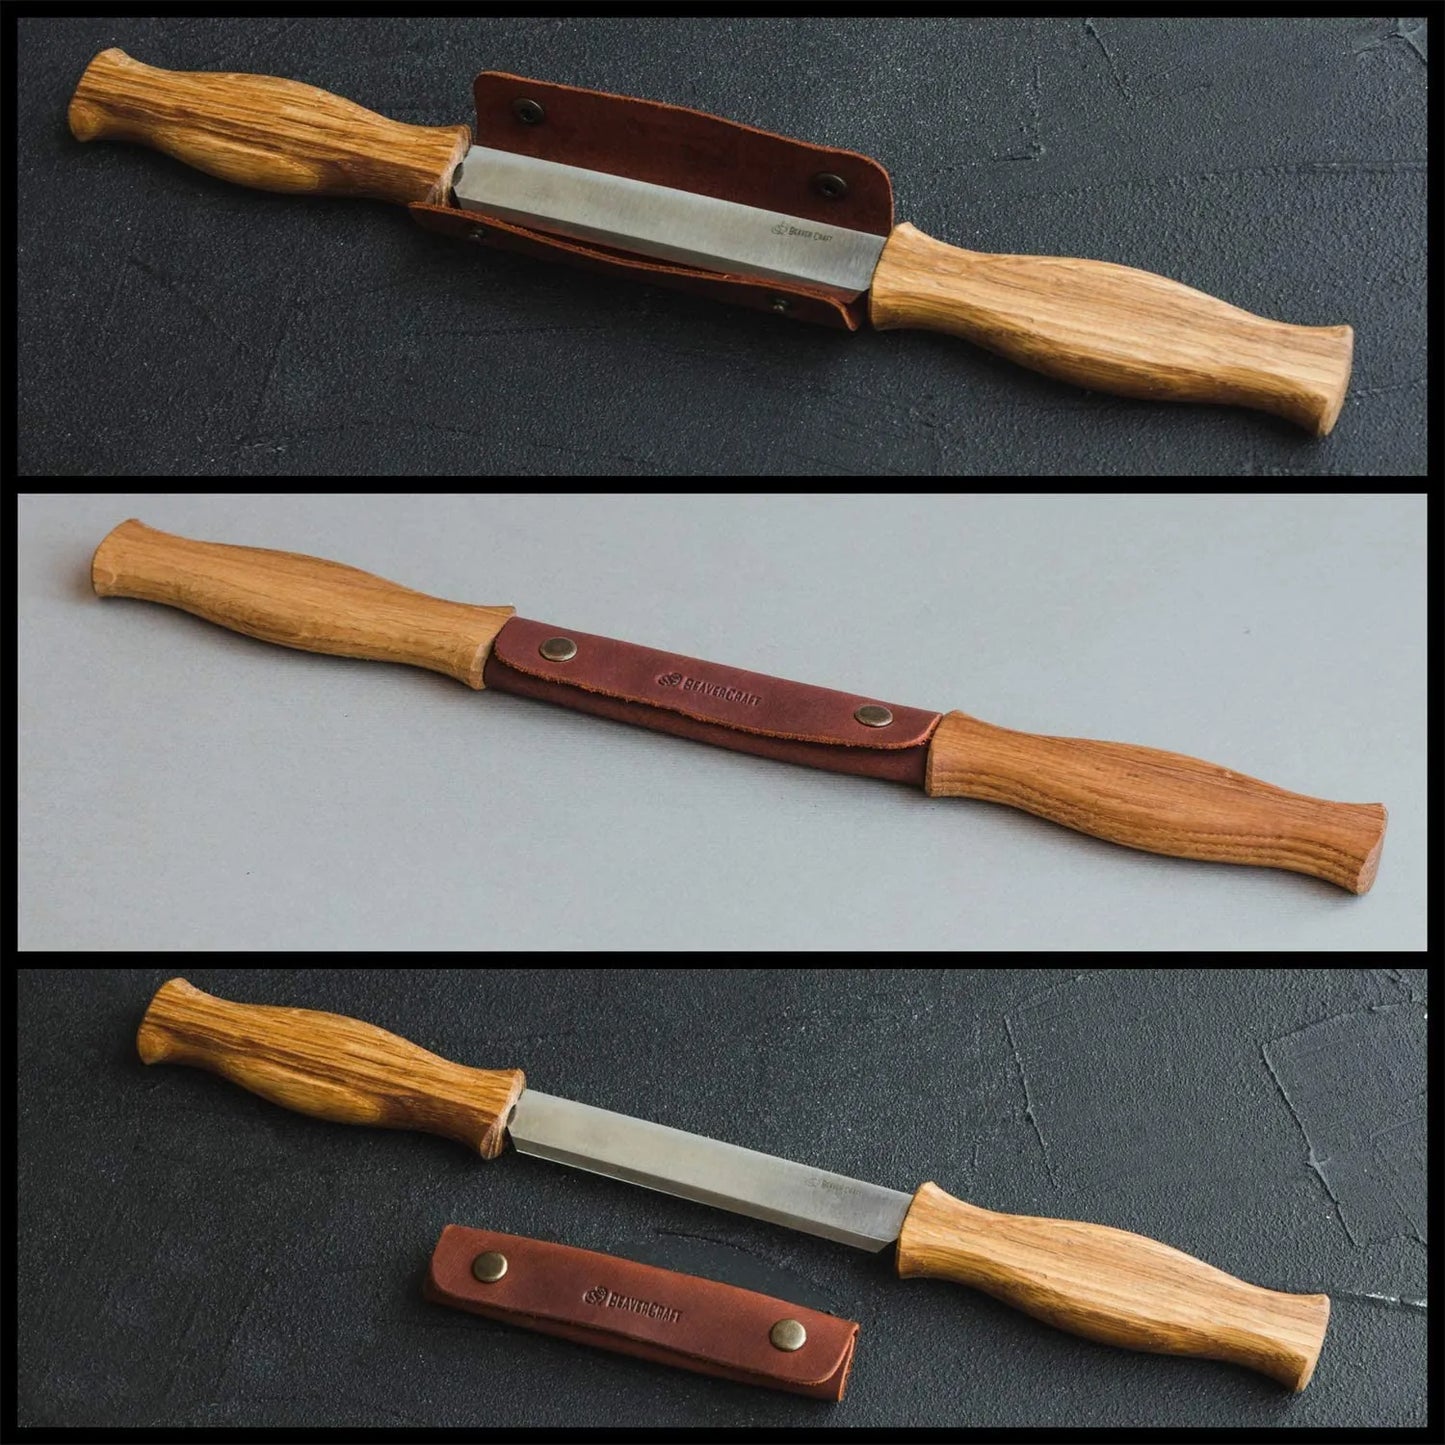 BeaverCraft DK1S Wood Carving Drawknife with Oak Handle in Leather Sheath